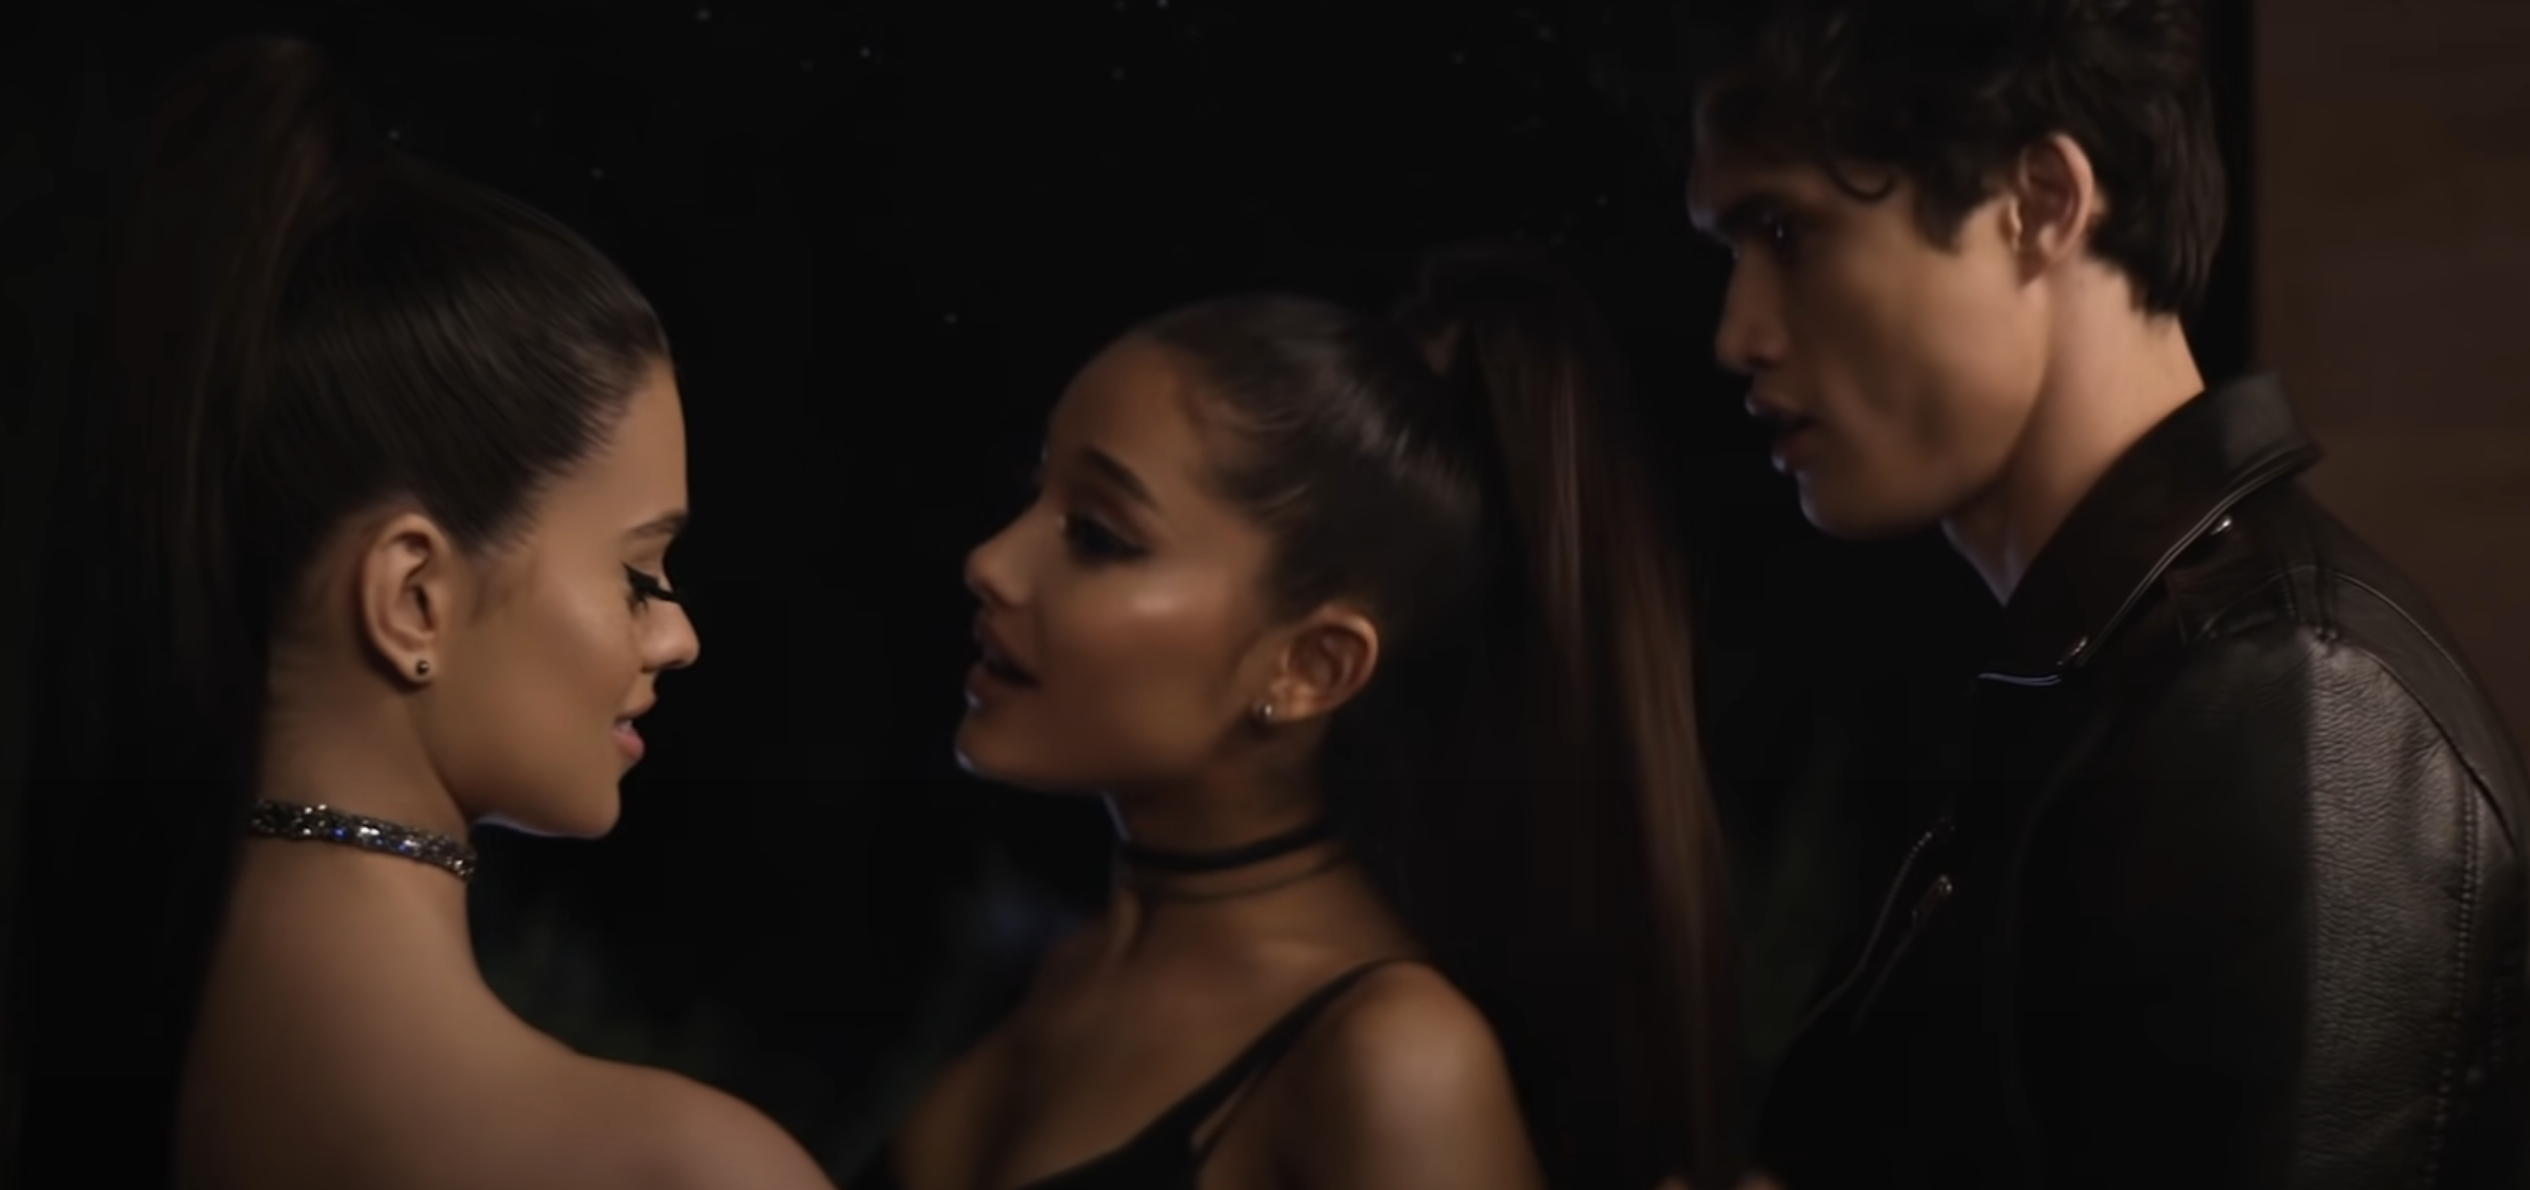 ariana with a look-alike and a male interest in the music video